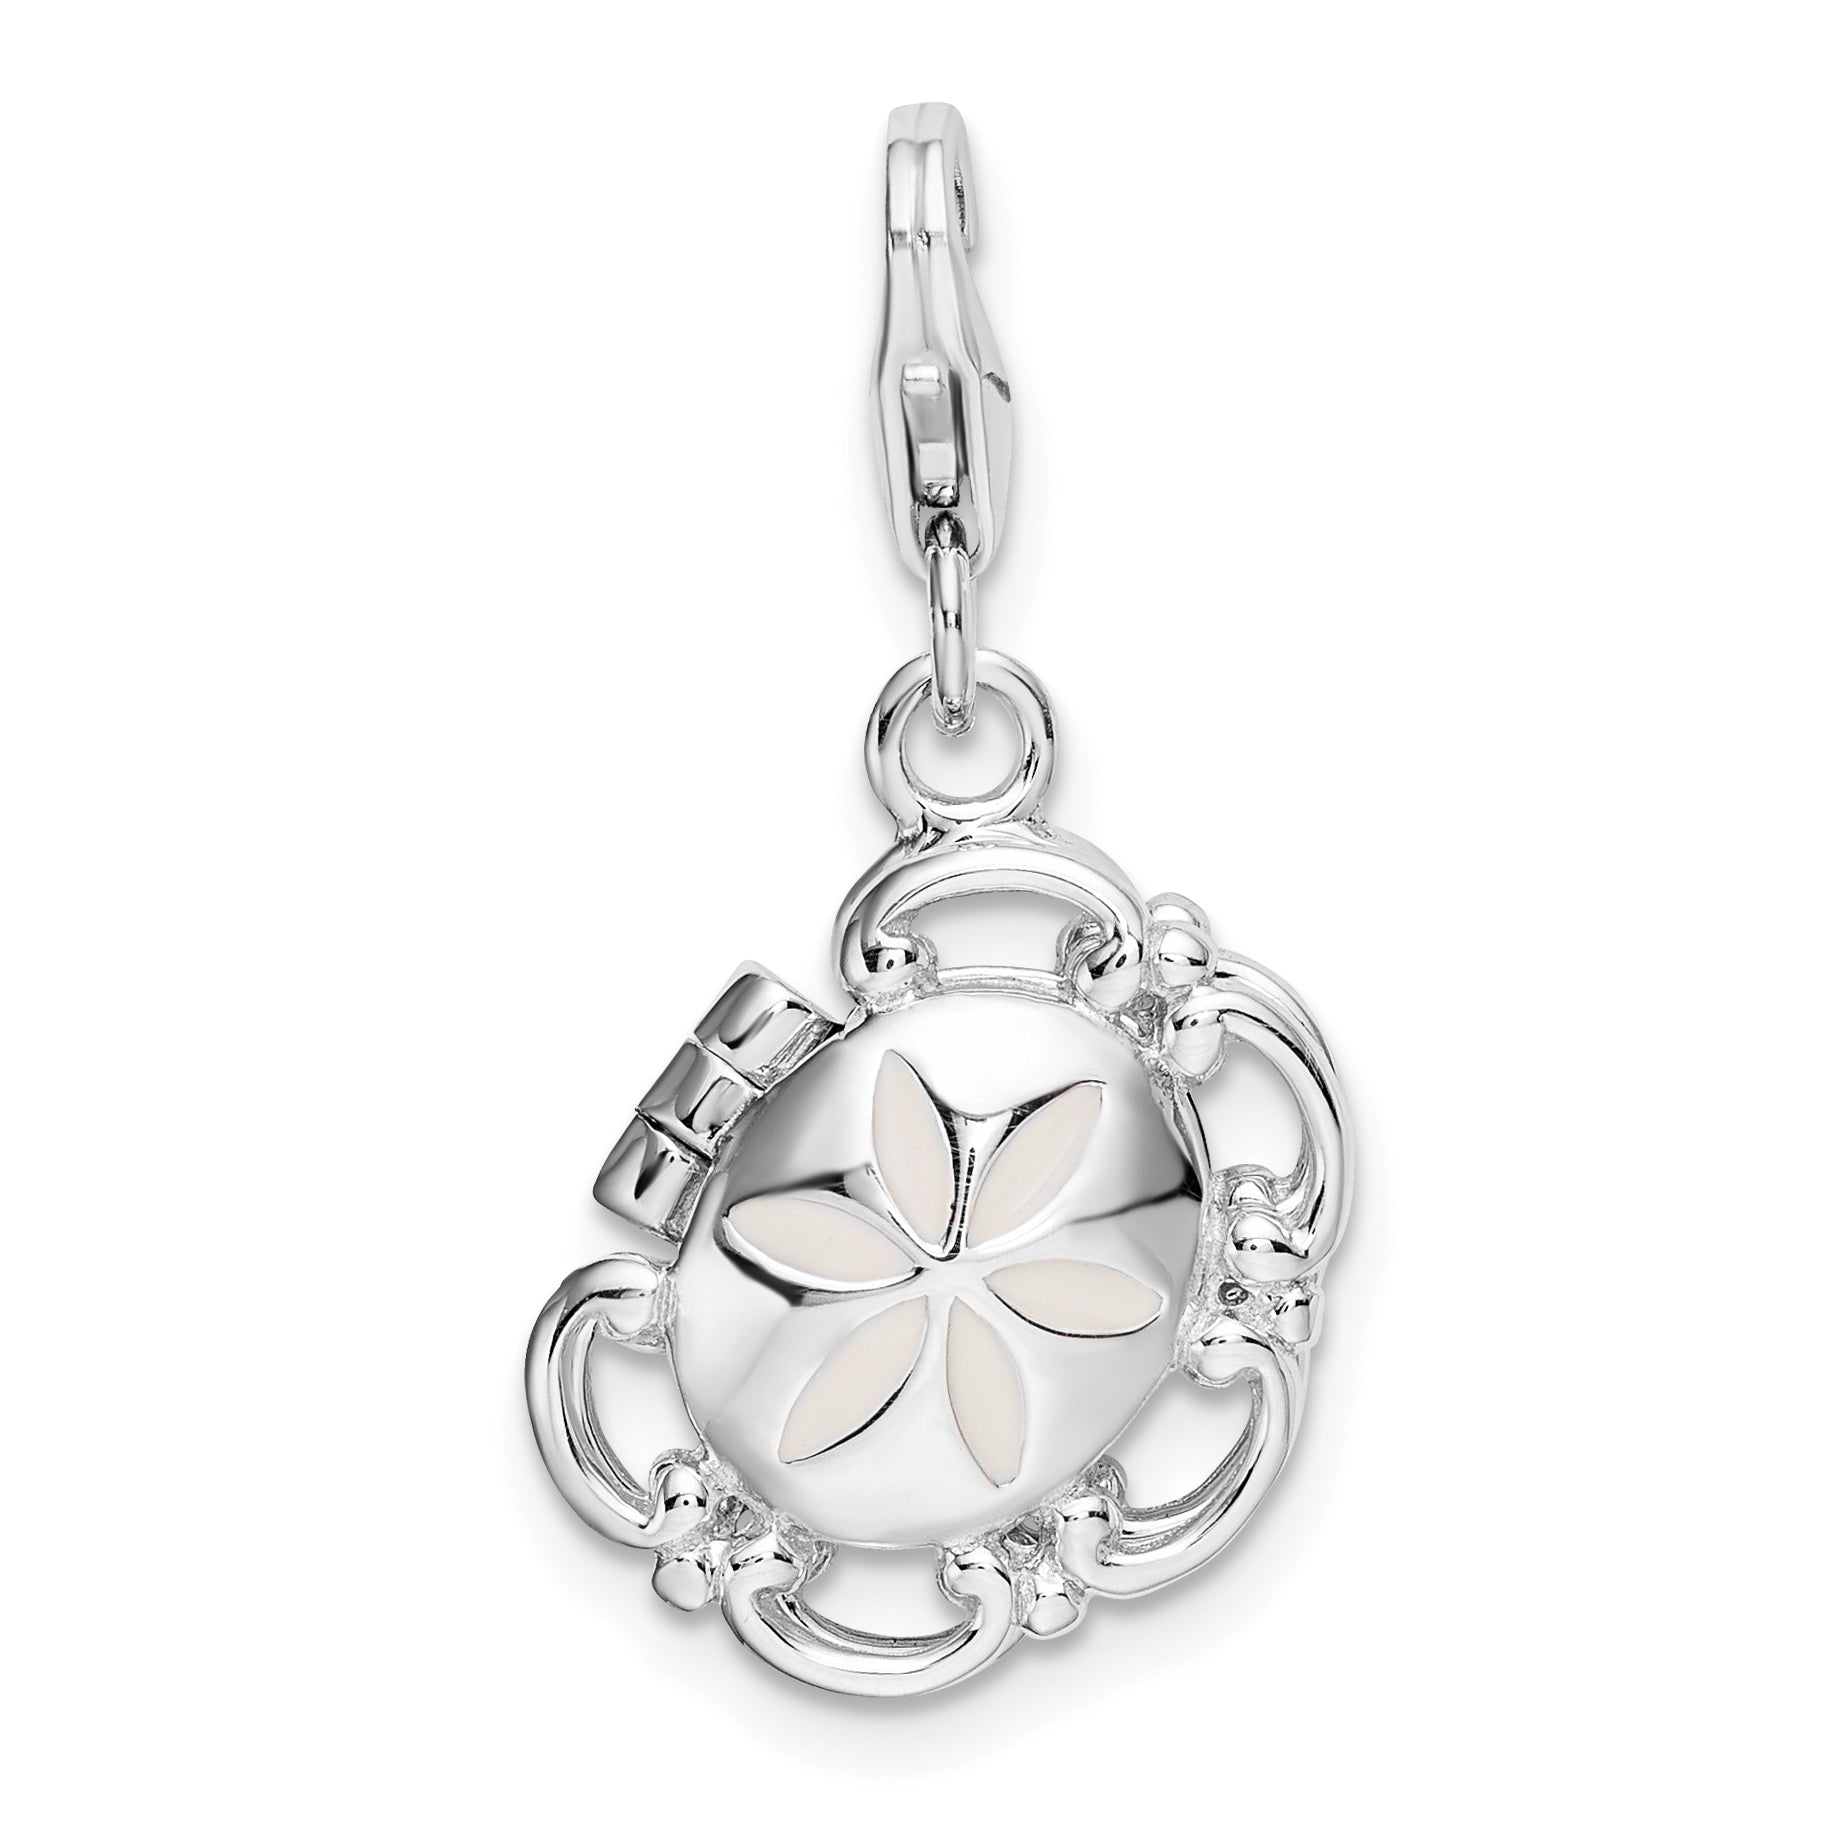 Amore La Vita Sterling Silver Rhodium-plated Polished 3-D Enameled Compact Charm with Fancy Lobster Clasp